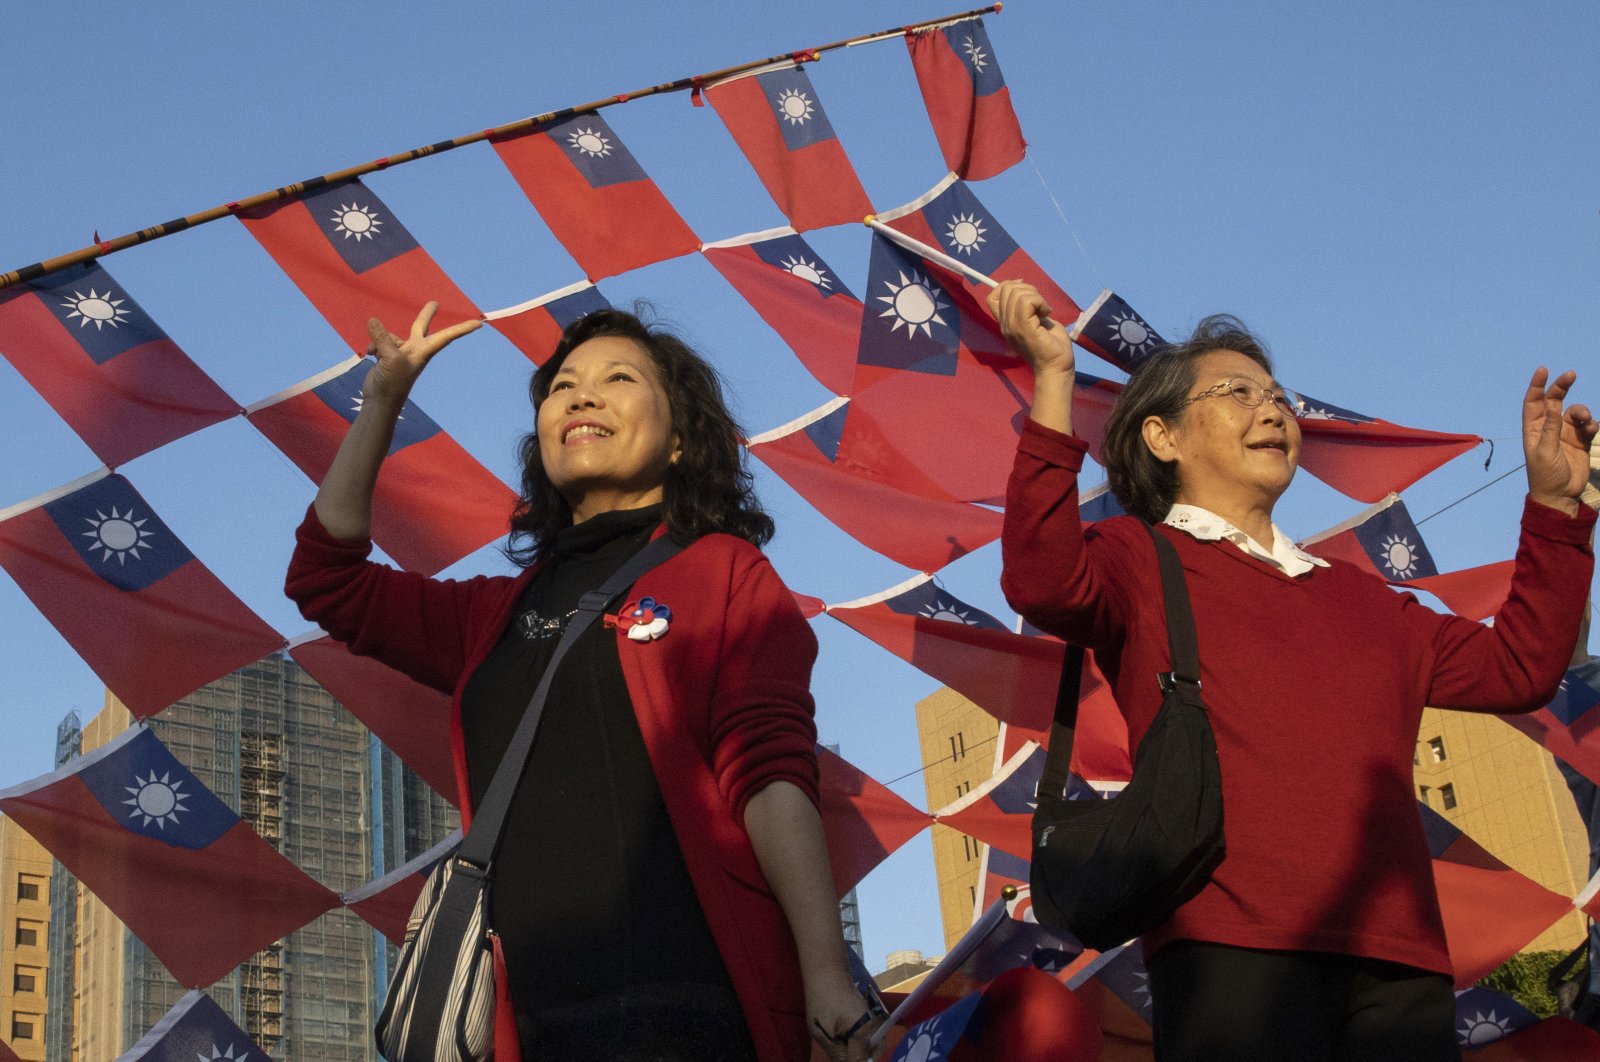 Supporters of the Nationalist, or KMT, party pose with the Taiwanese flag during a rally for the presidential election in Taipei, Taiwan, Jan. 9, 2020. (AP Photo)